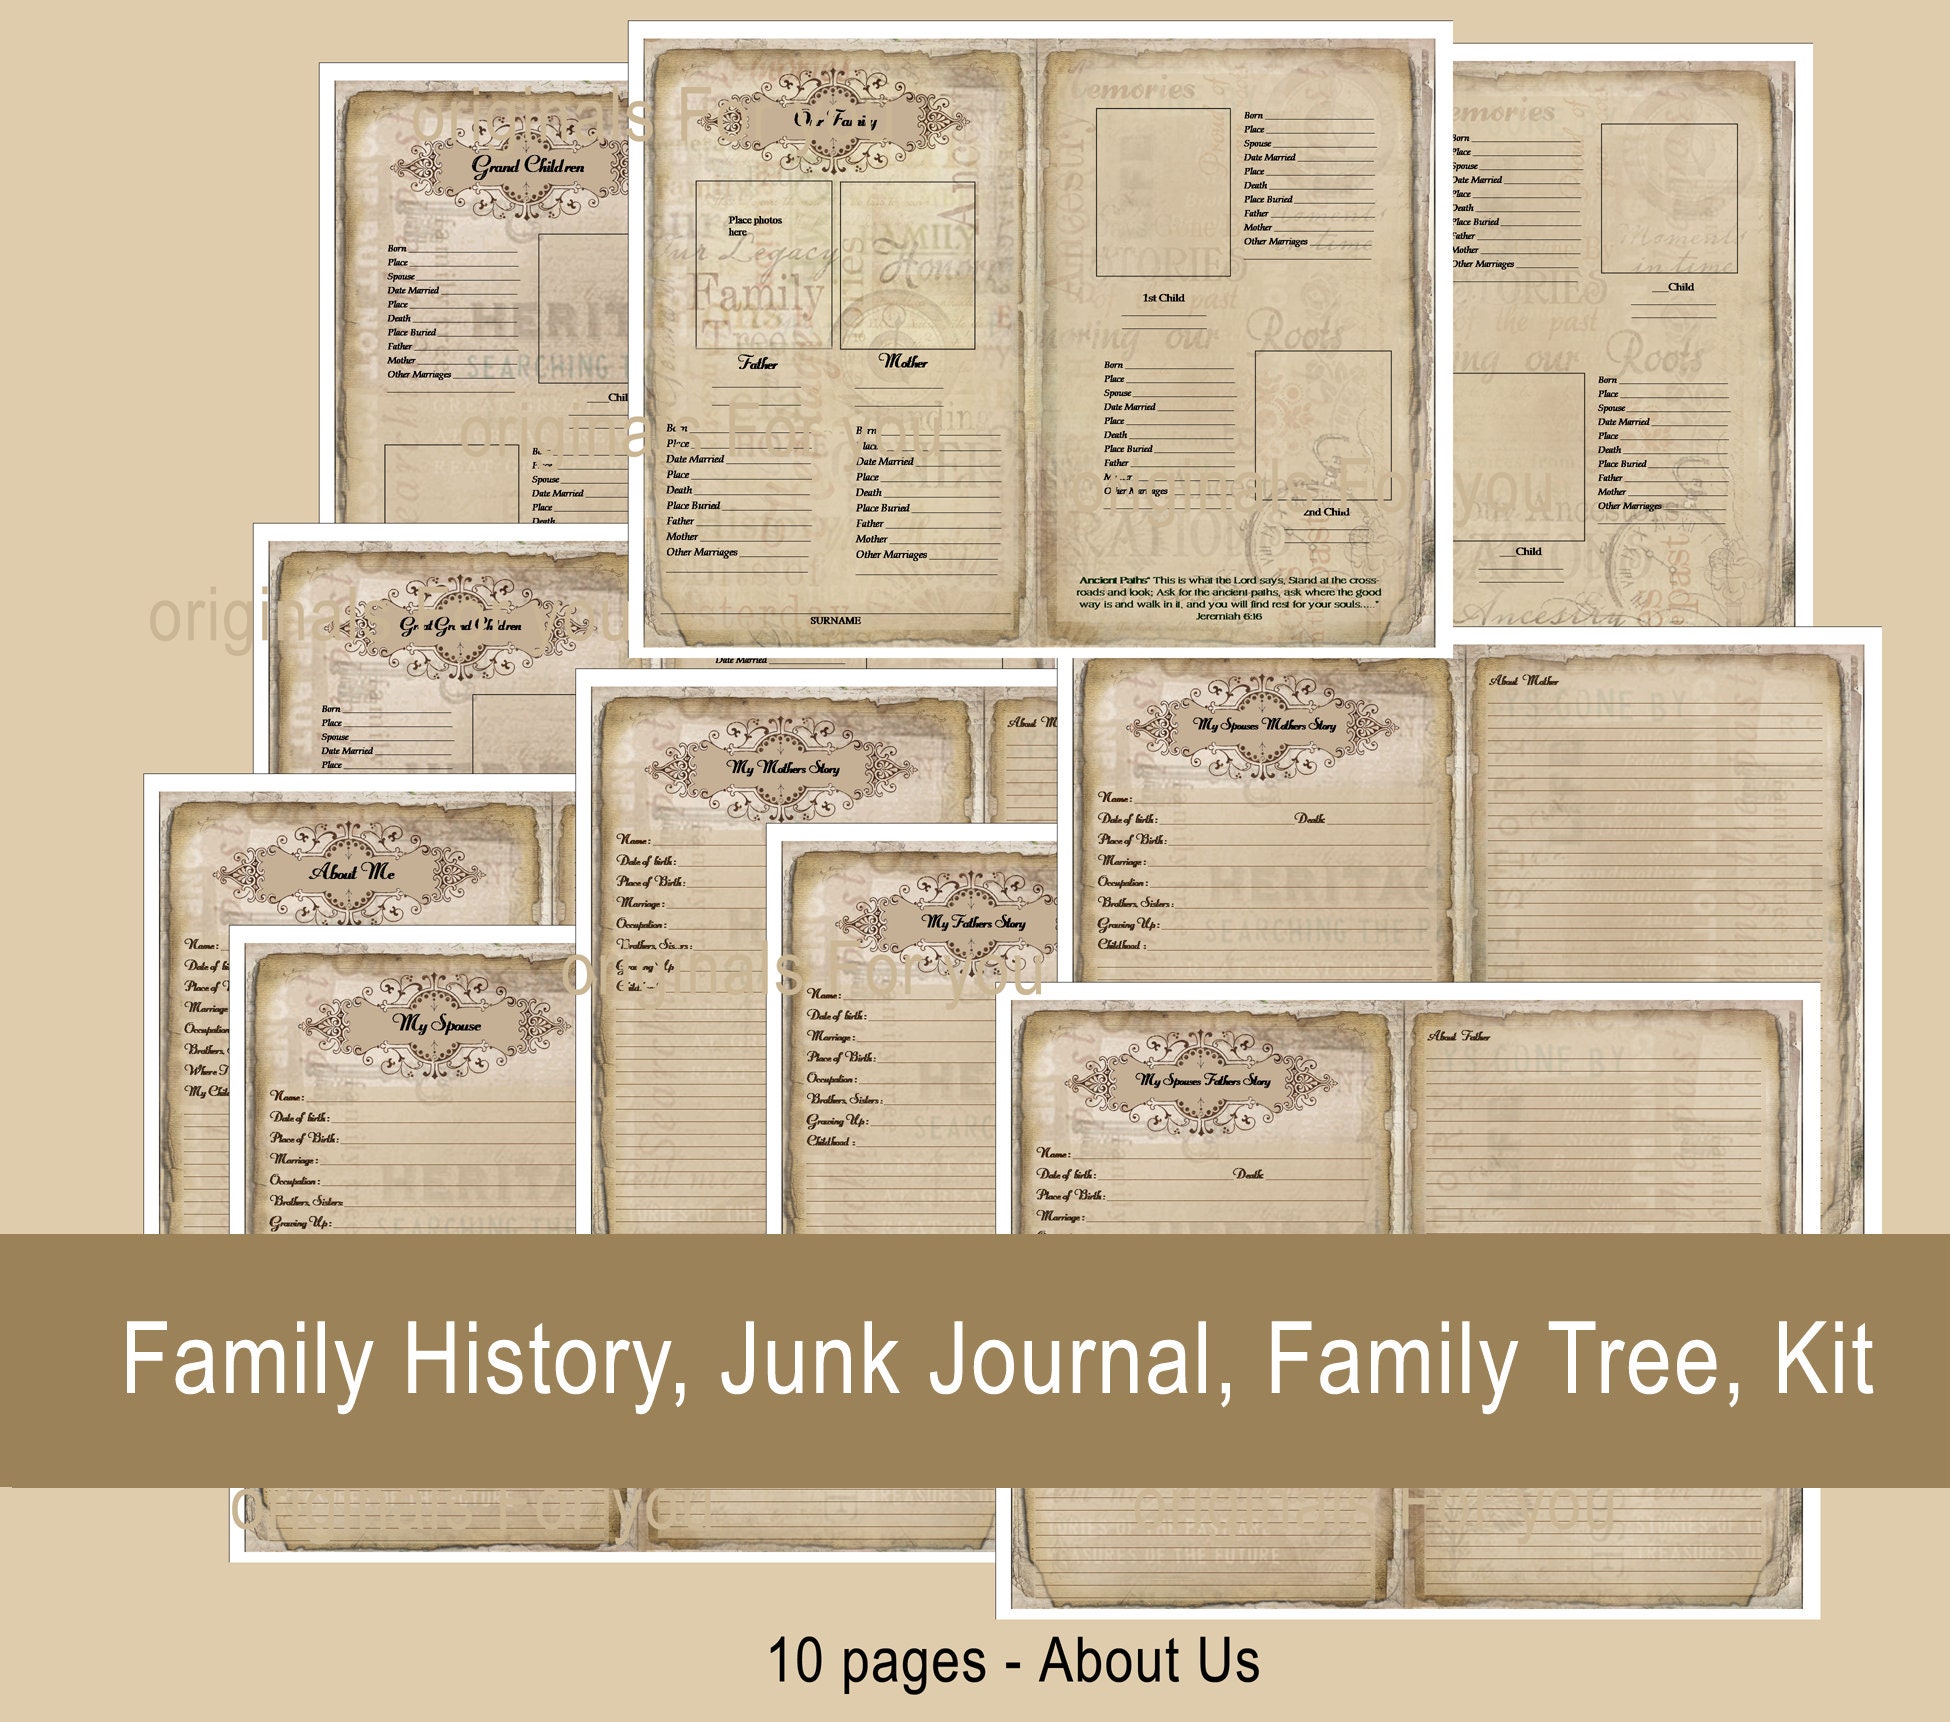 7 Generation Editable Family History Book Template Ancestry Book Genealogy  Organizer Worksheet Family Tree Notebook Ancestry Journal Tracker 